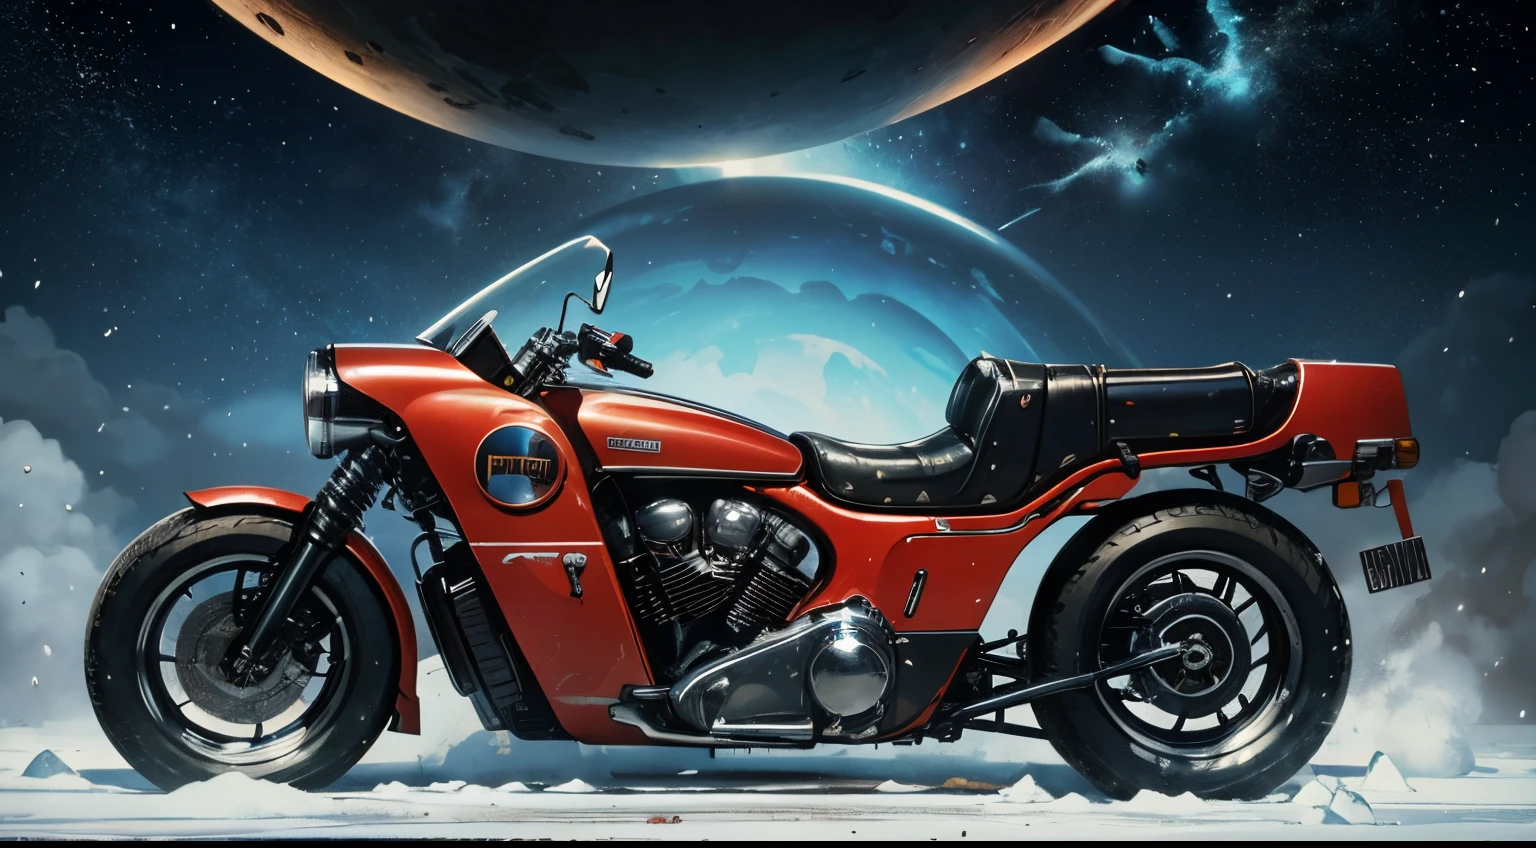 Science Fiction,Sci-Fi Movies,Retro, Motor cycle,Based on the Movie Foundation ,Retro, scramble-style, 500cc engine, double mufflers,rebel,chaotic,future world,world of socialism,snow,chaos, after war